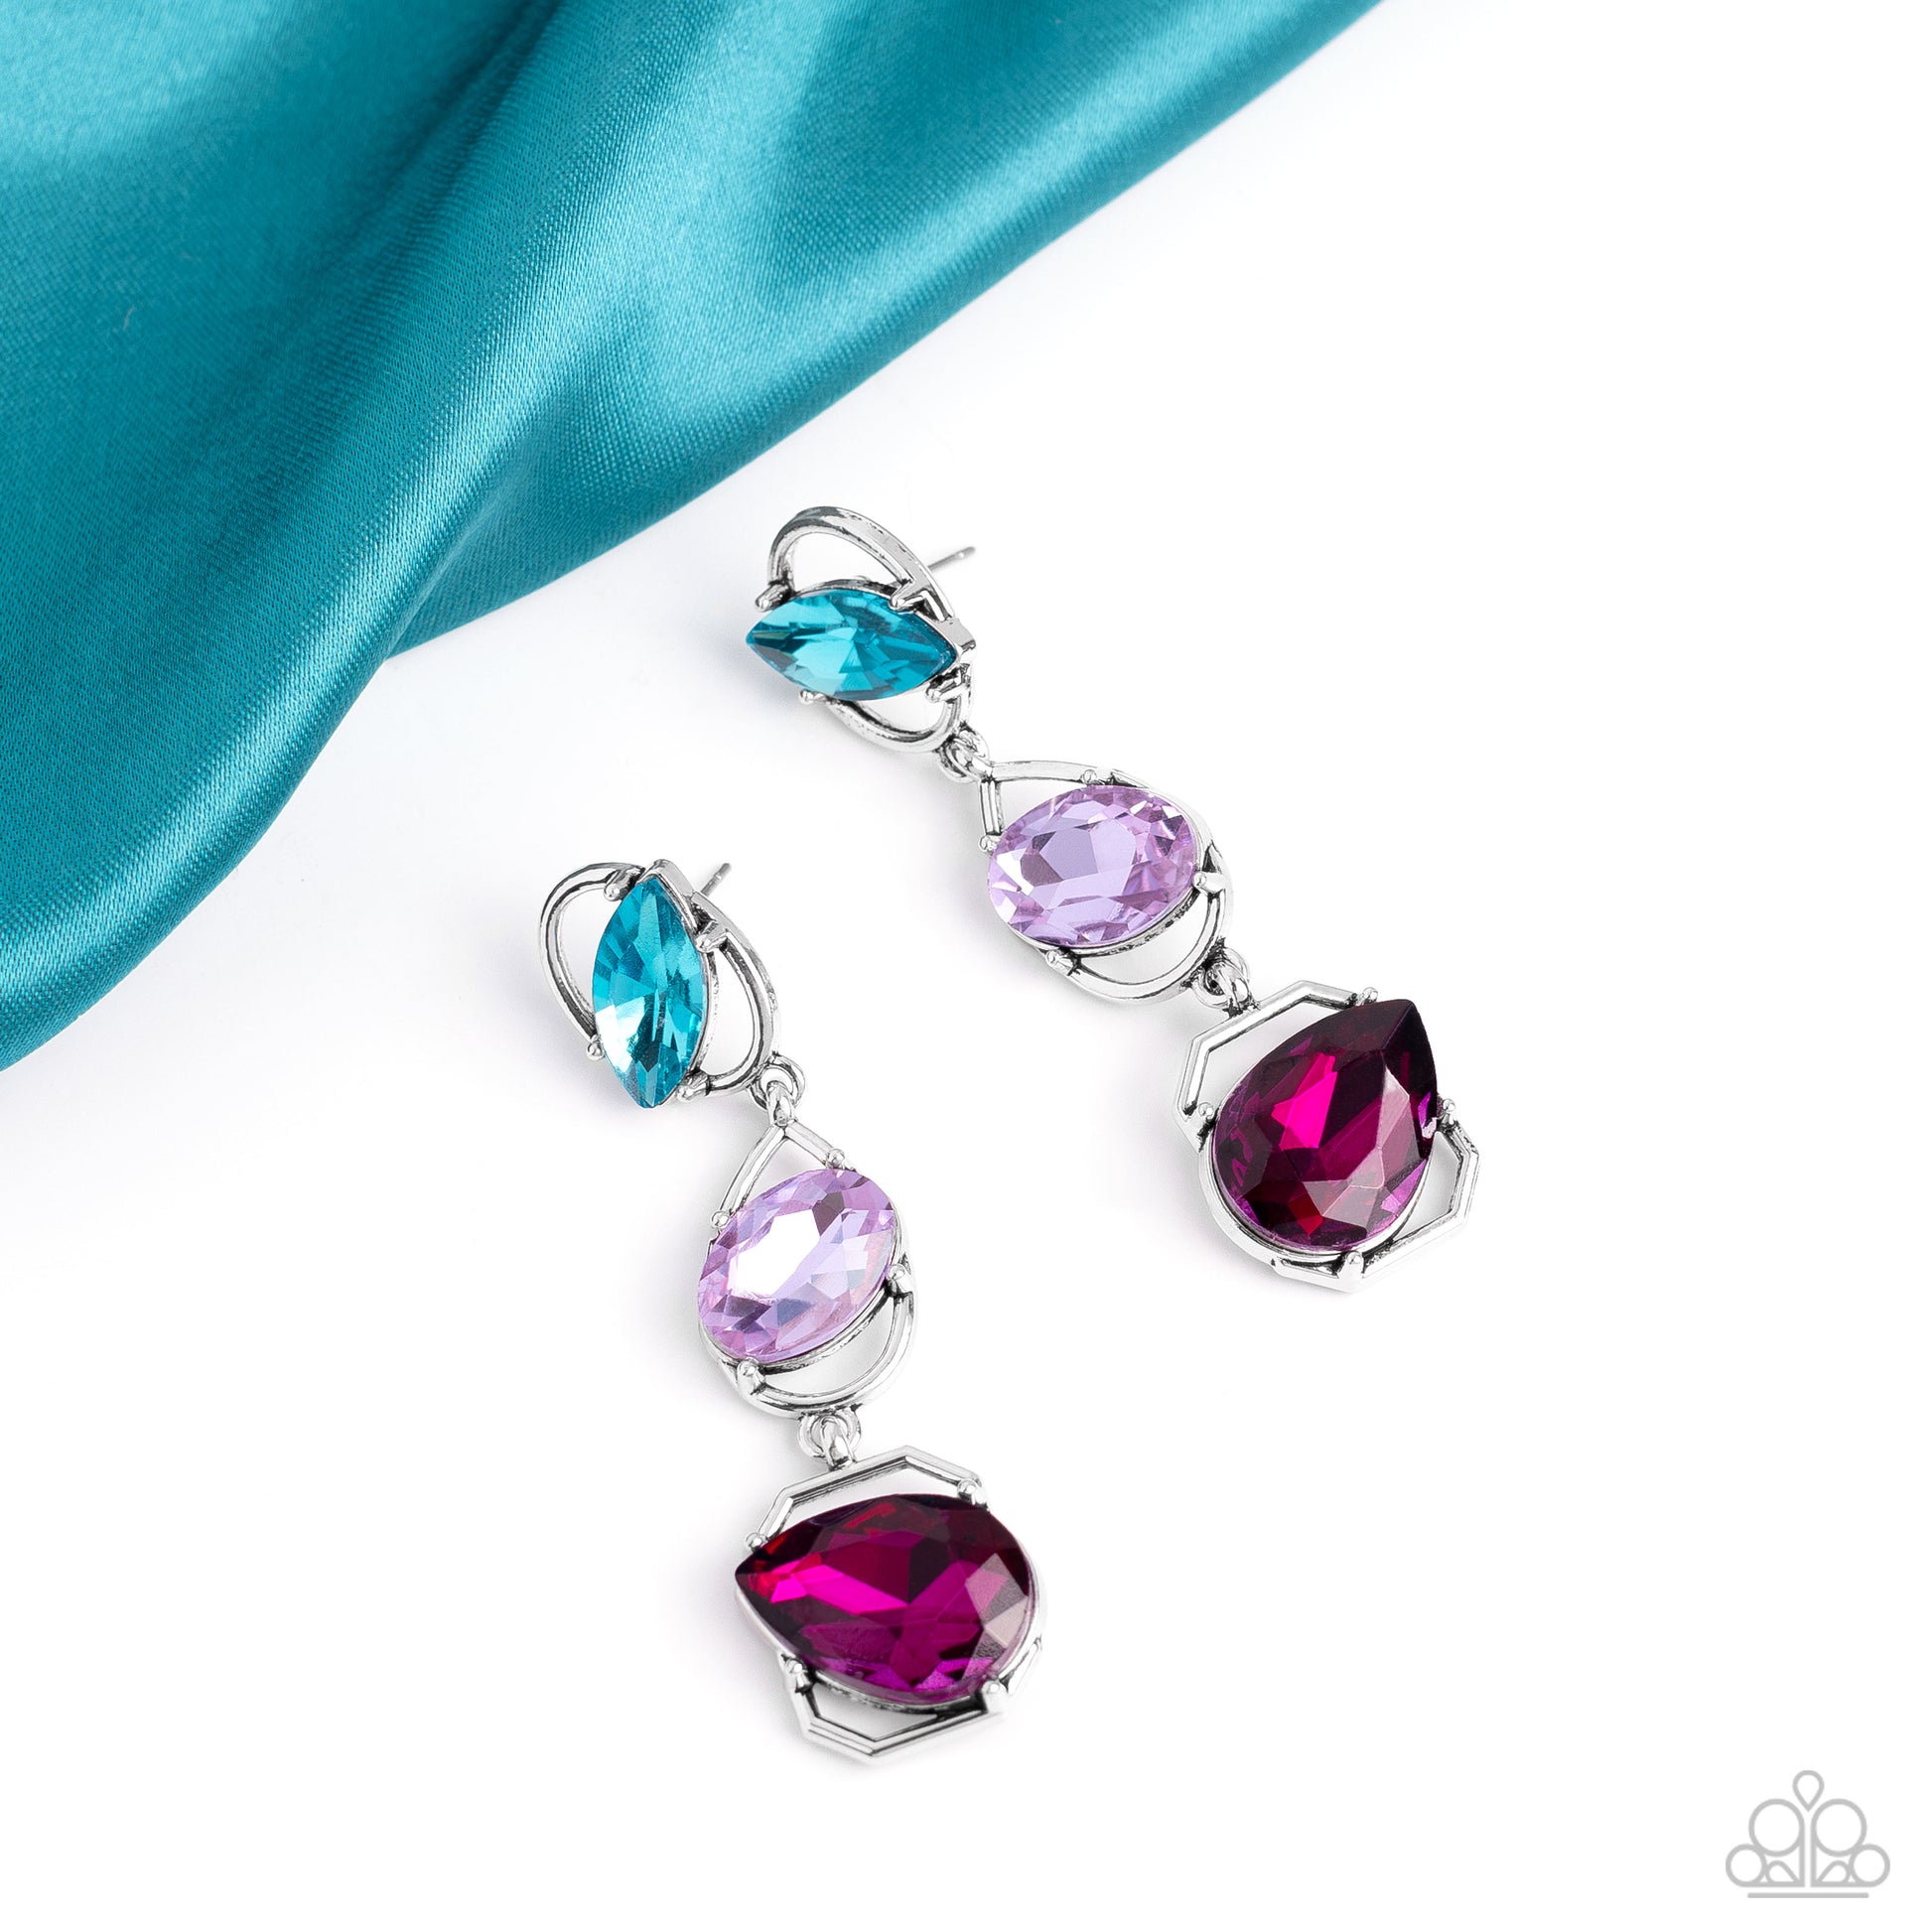 Paparazzi Accessories - Dimensional Dance - Multi Earrings linking together to create a geometric lure, a sleek silver oval, teardrop, and emerald-cut frame cascade down the ear. Slanted sideways in pronged settings across each frame, a fuchsia teardrop, purple oval-cut, and aquamarine marquise-cut gem create a gorgeous pop of color against the thin edgy frames. Earring attaches to a standard post fitting.  Sold as one pair of post earrings.